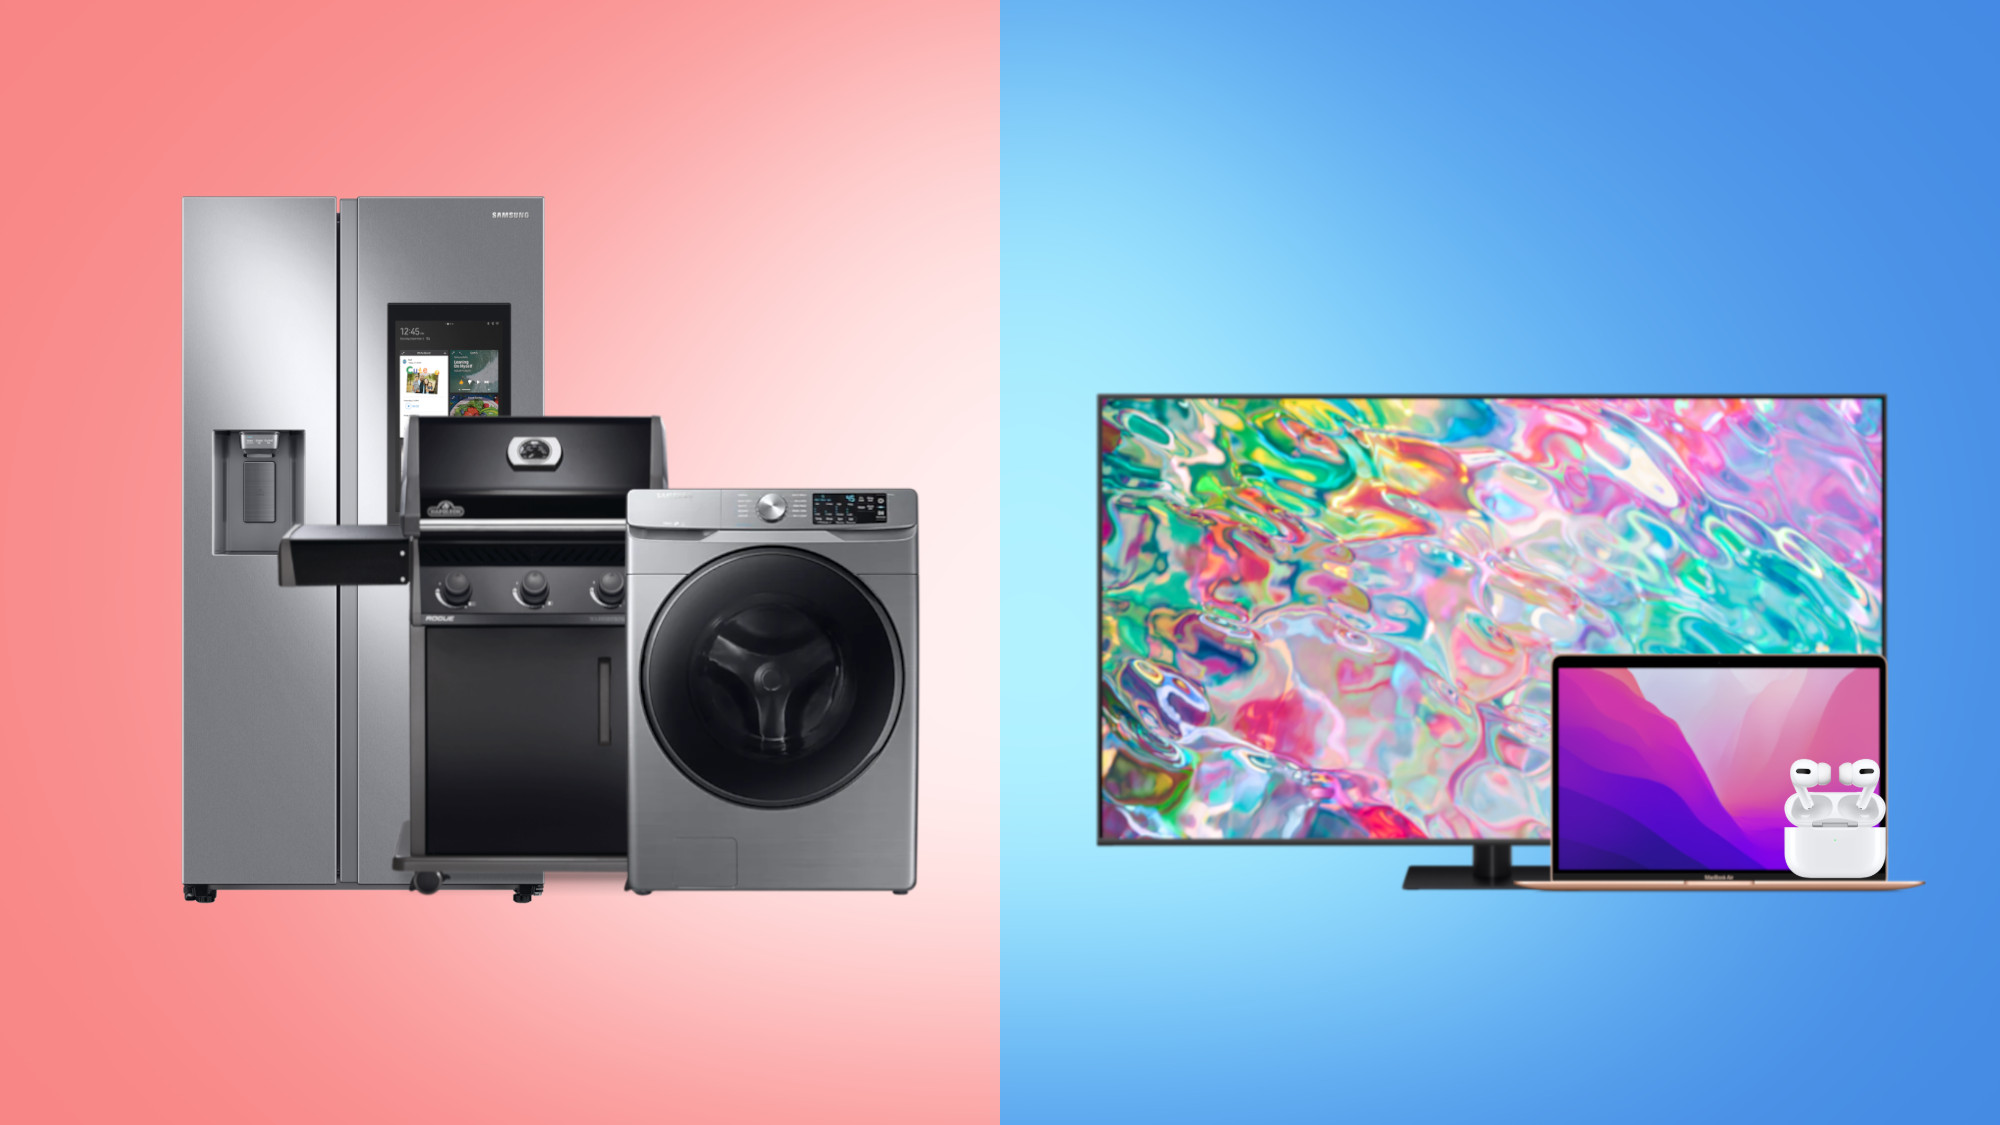 July 4th sale: Shop Walmart deals on TVs, pools, furniture and bikes